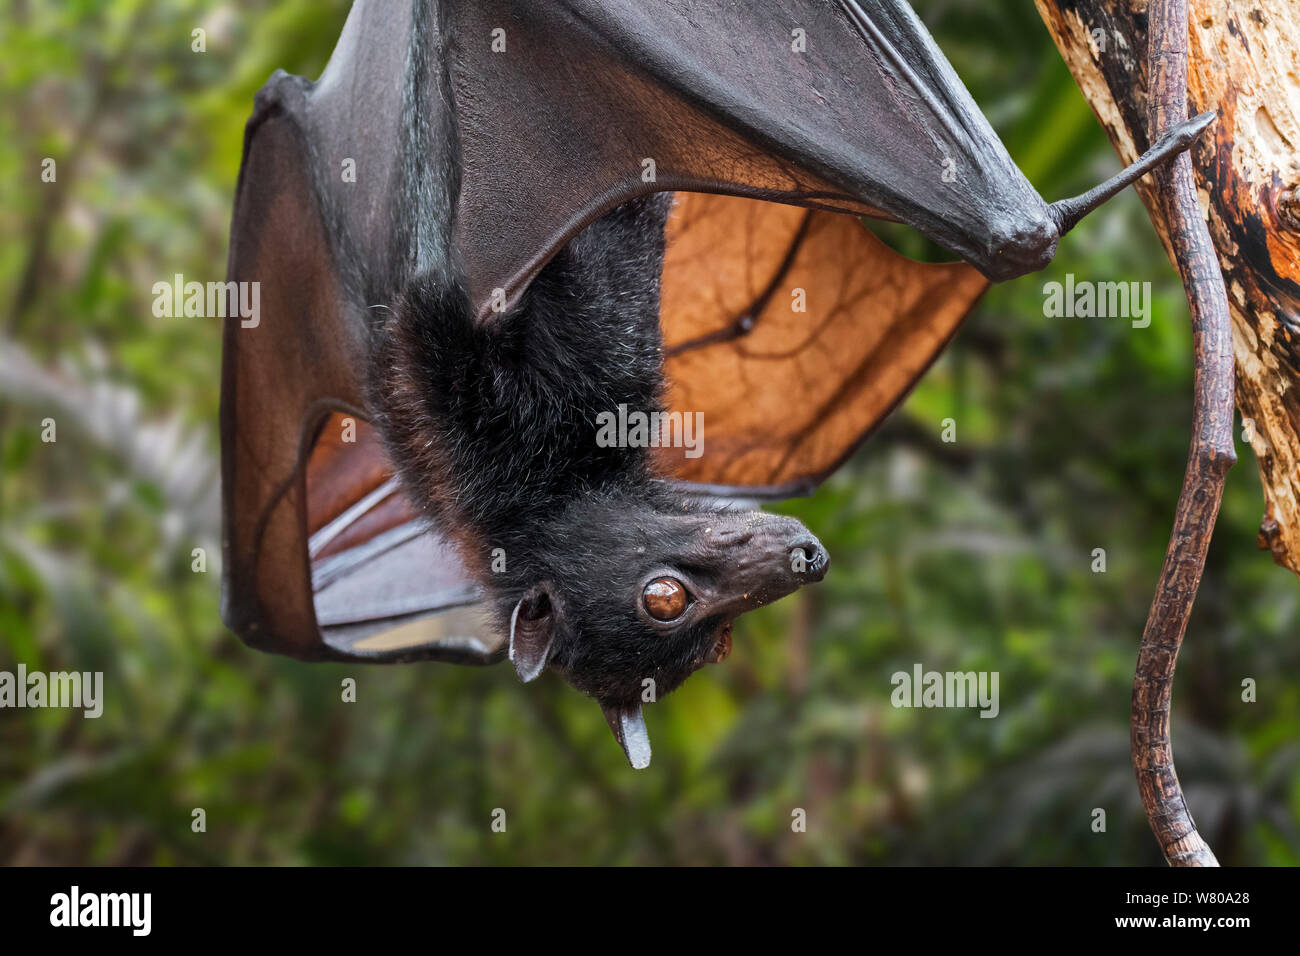 Lyle's flying fox (Pteropus lylei) native to Cambodia, Thailand and Vietnam hanging upside down and showing wing veins Stock Photo